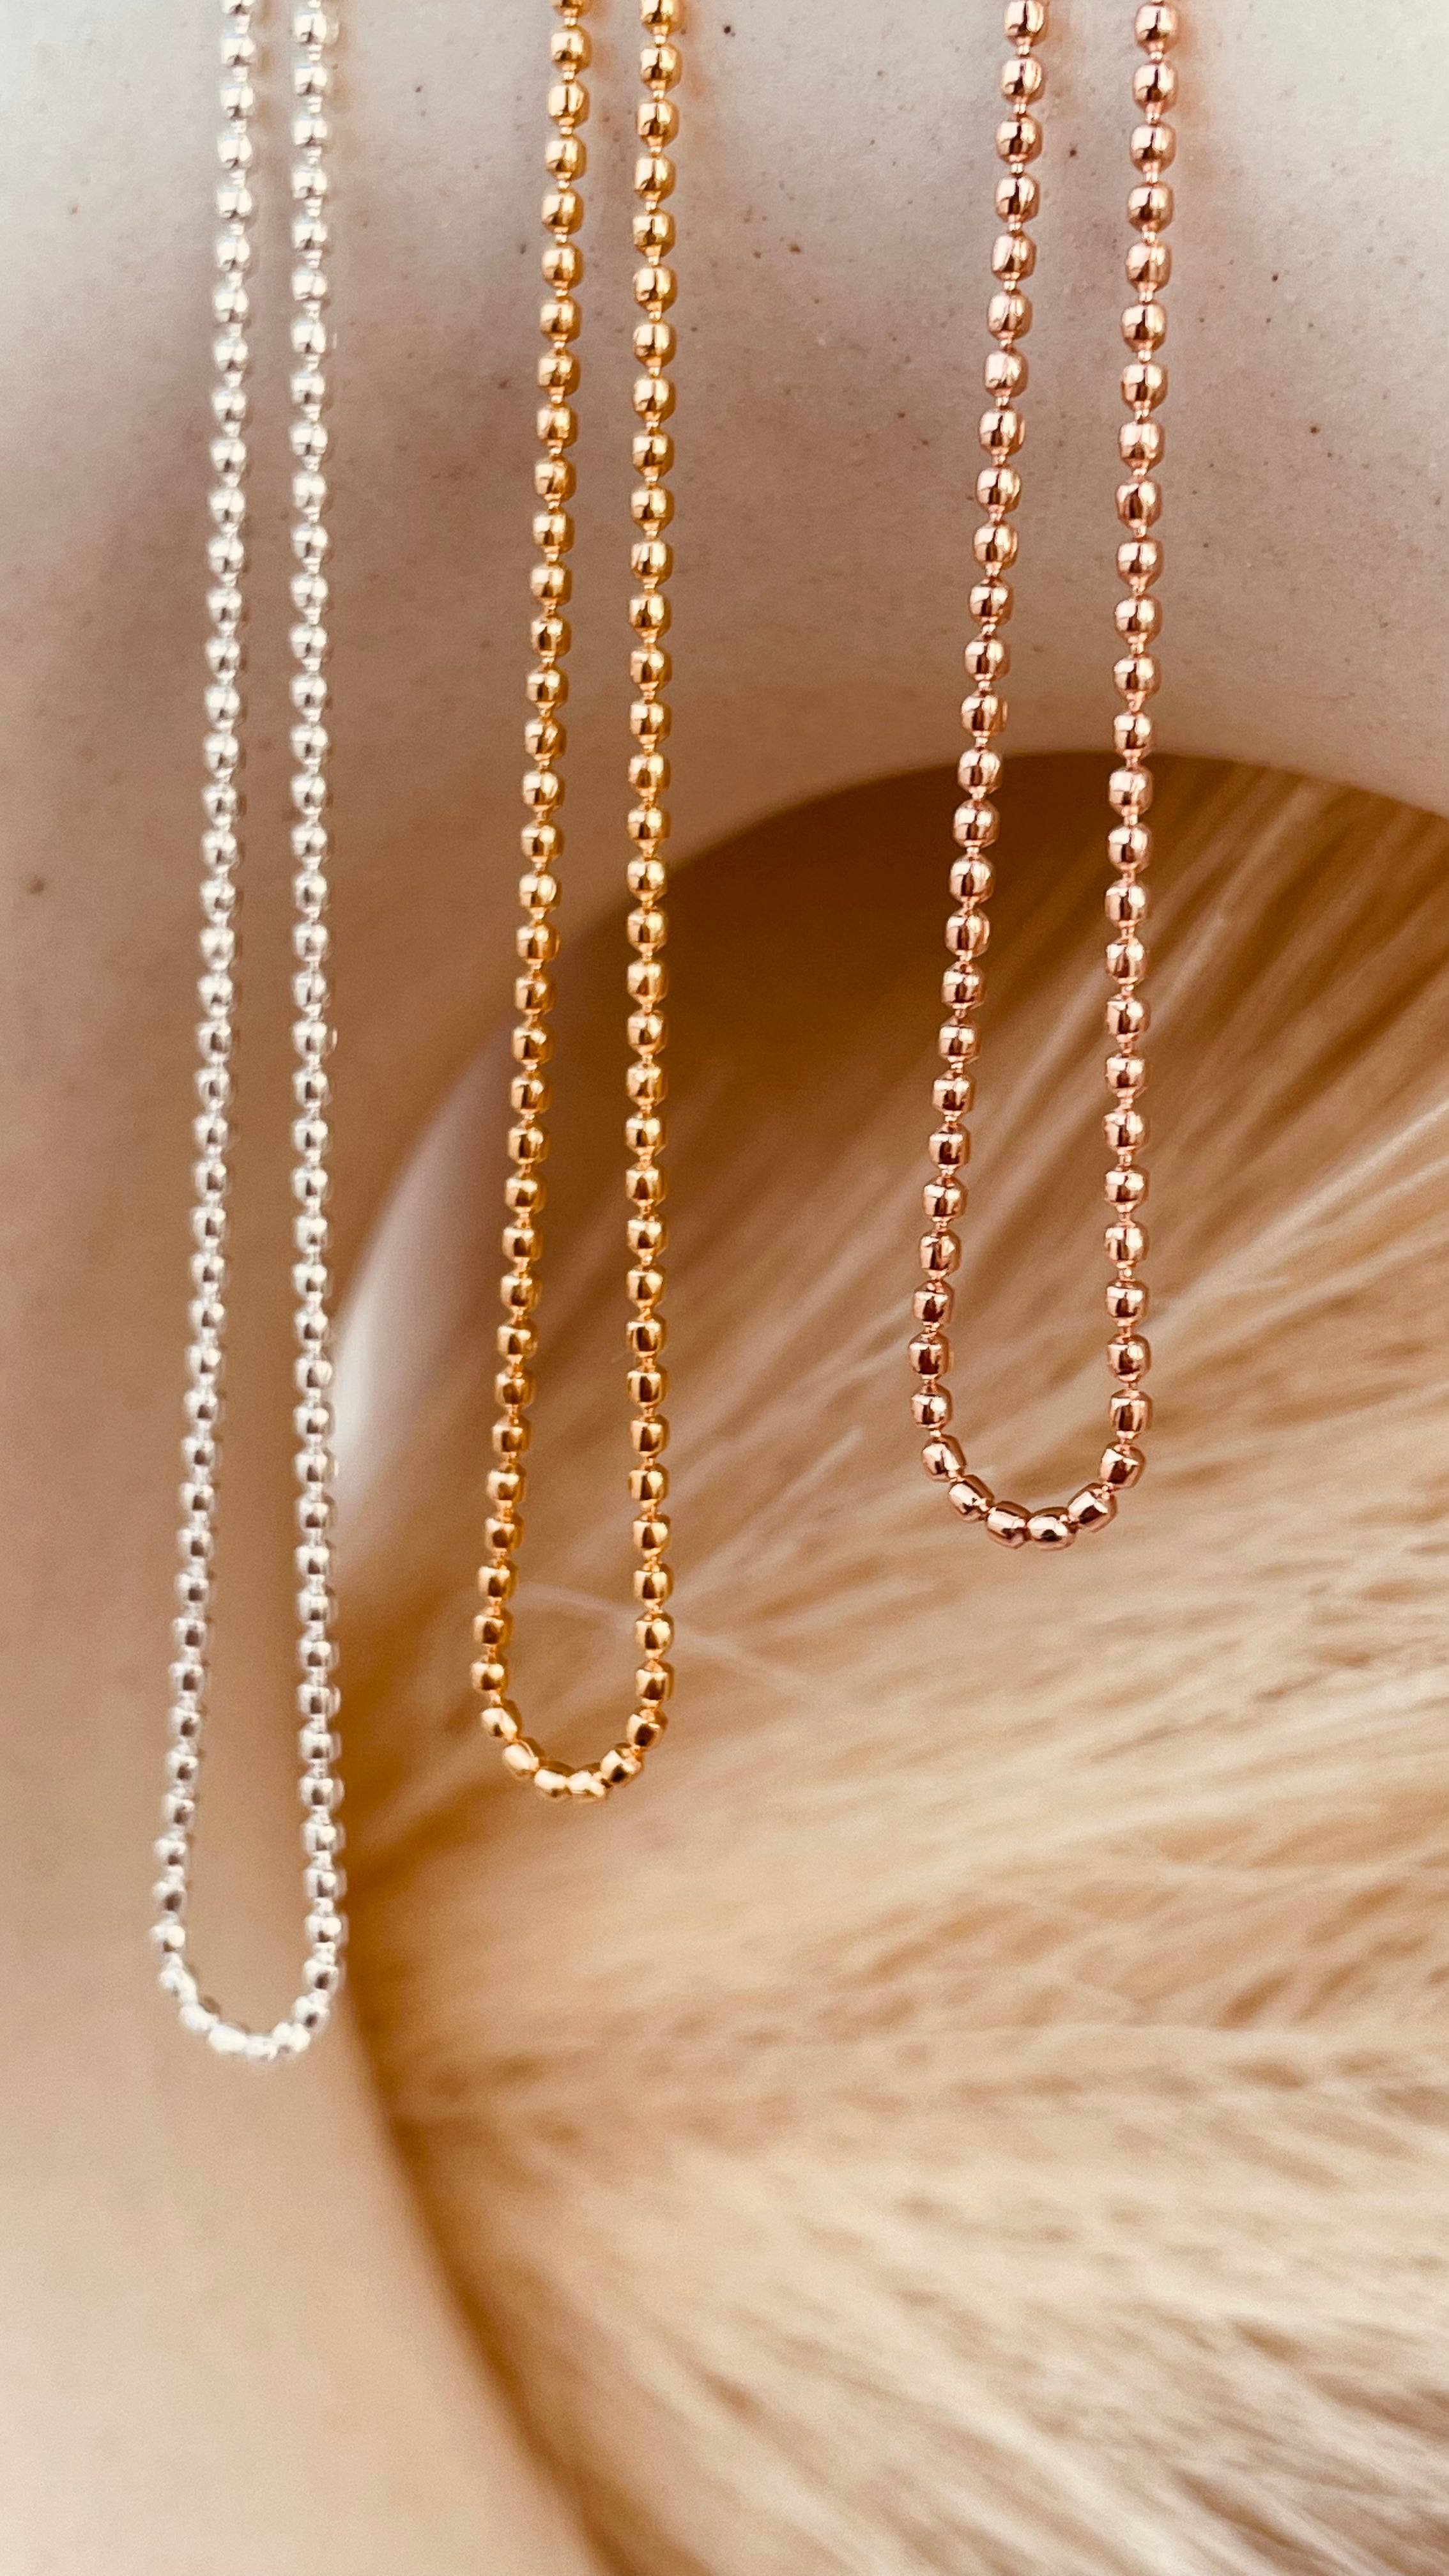 Rose Gold Faceted Beaded Chain Necklace - Octonov 